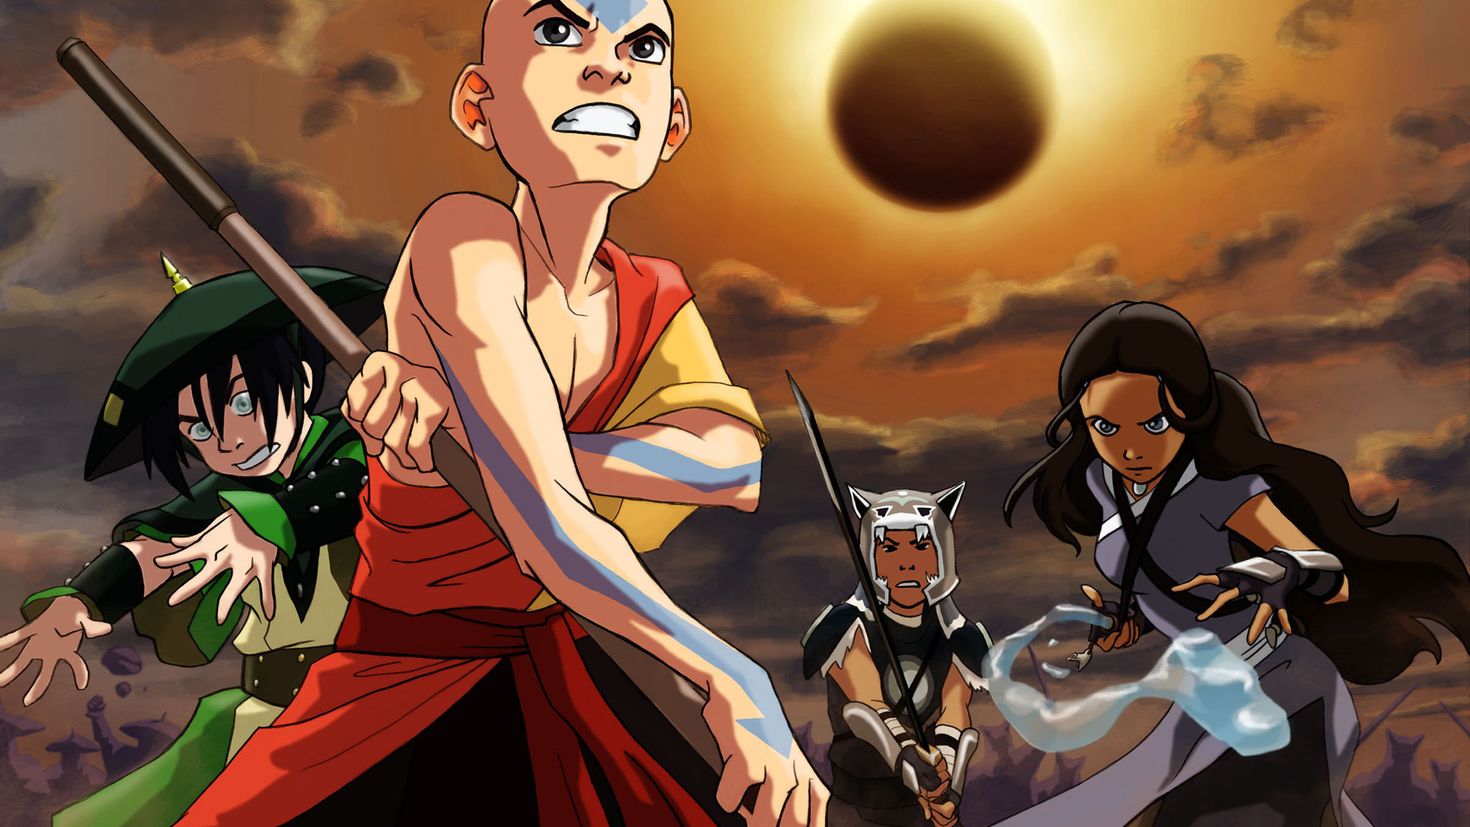 Аватар аанг. Аватар the last Airbender. Avatar the last airbender series